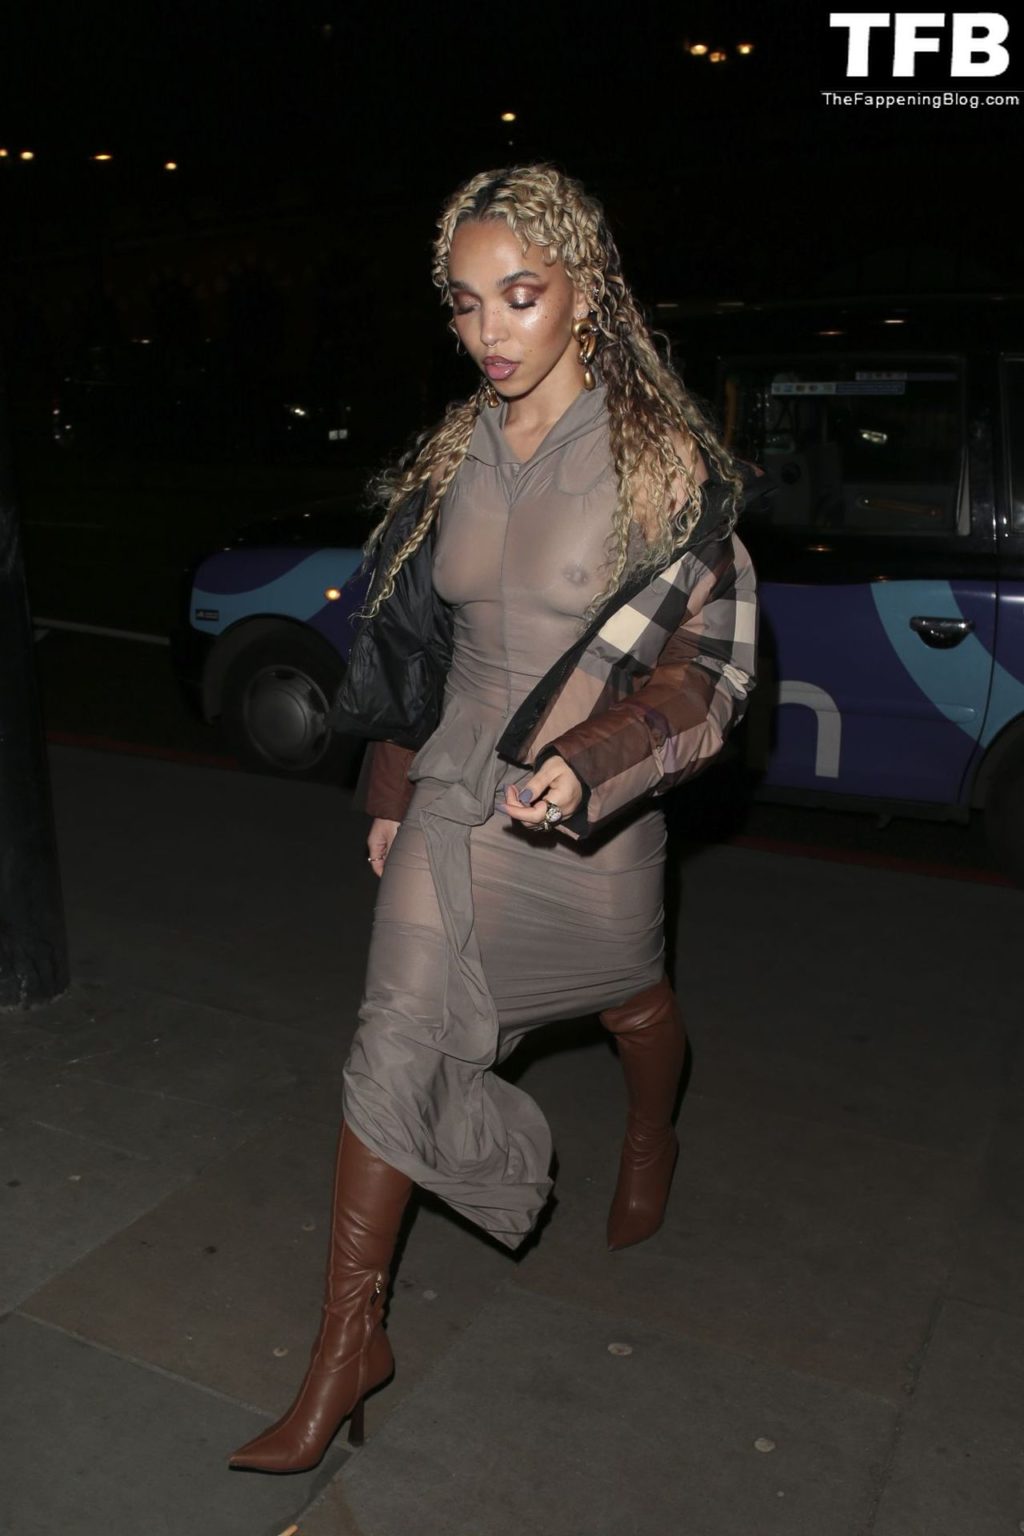 FKA Twigs See Through Nude Tits The Fappening Blog 5 1024x1536 - FKA Twigs Flashes Her Nude Tits in London (5 Photos)